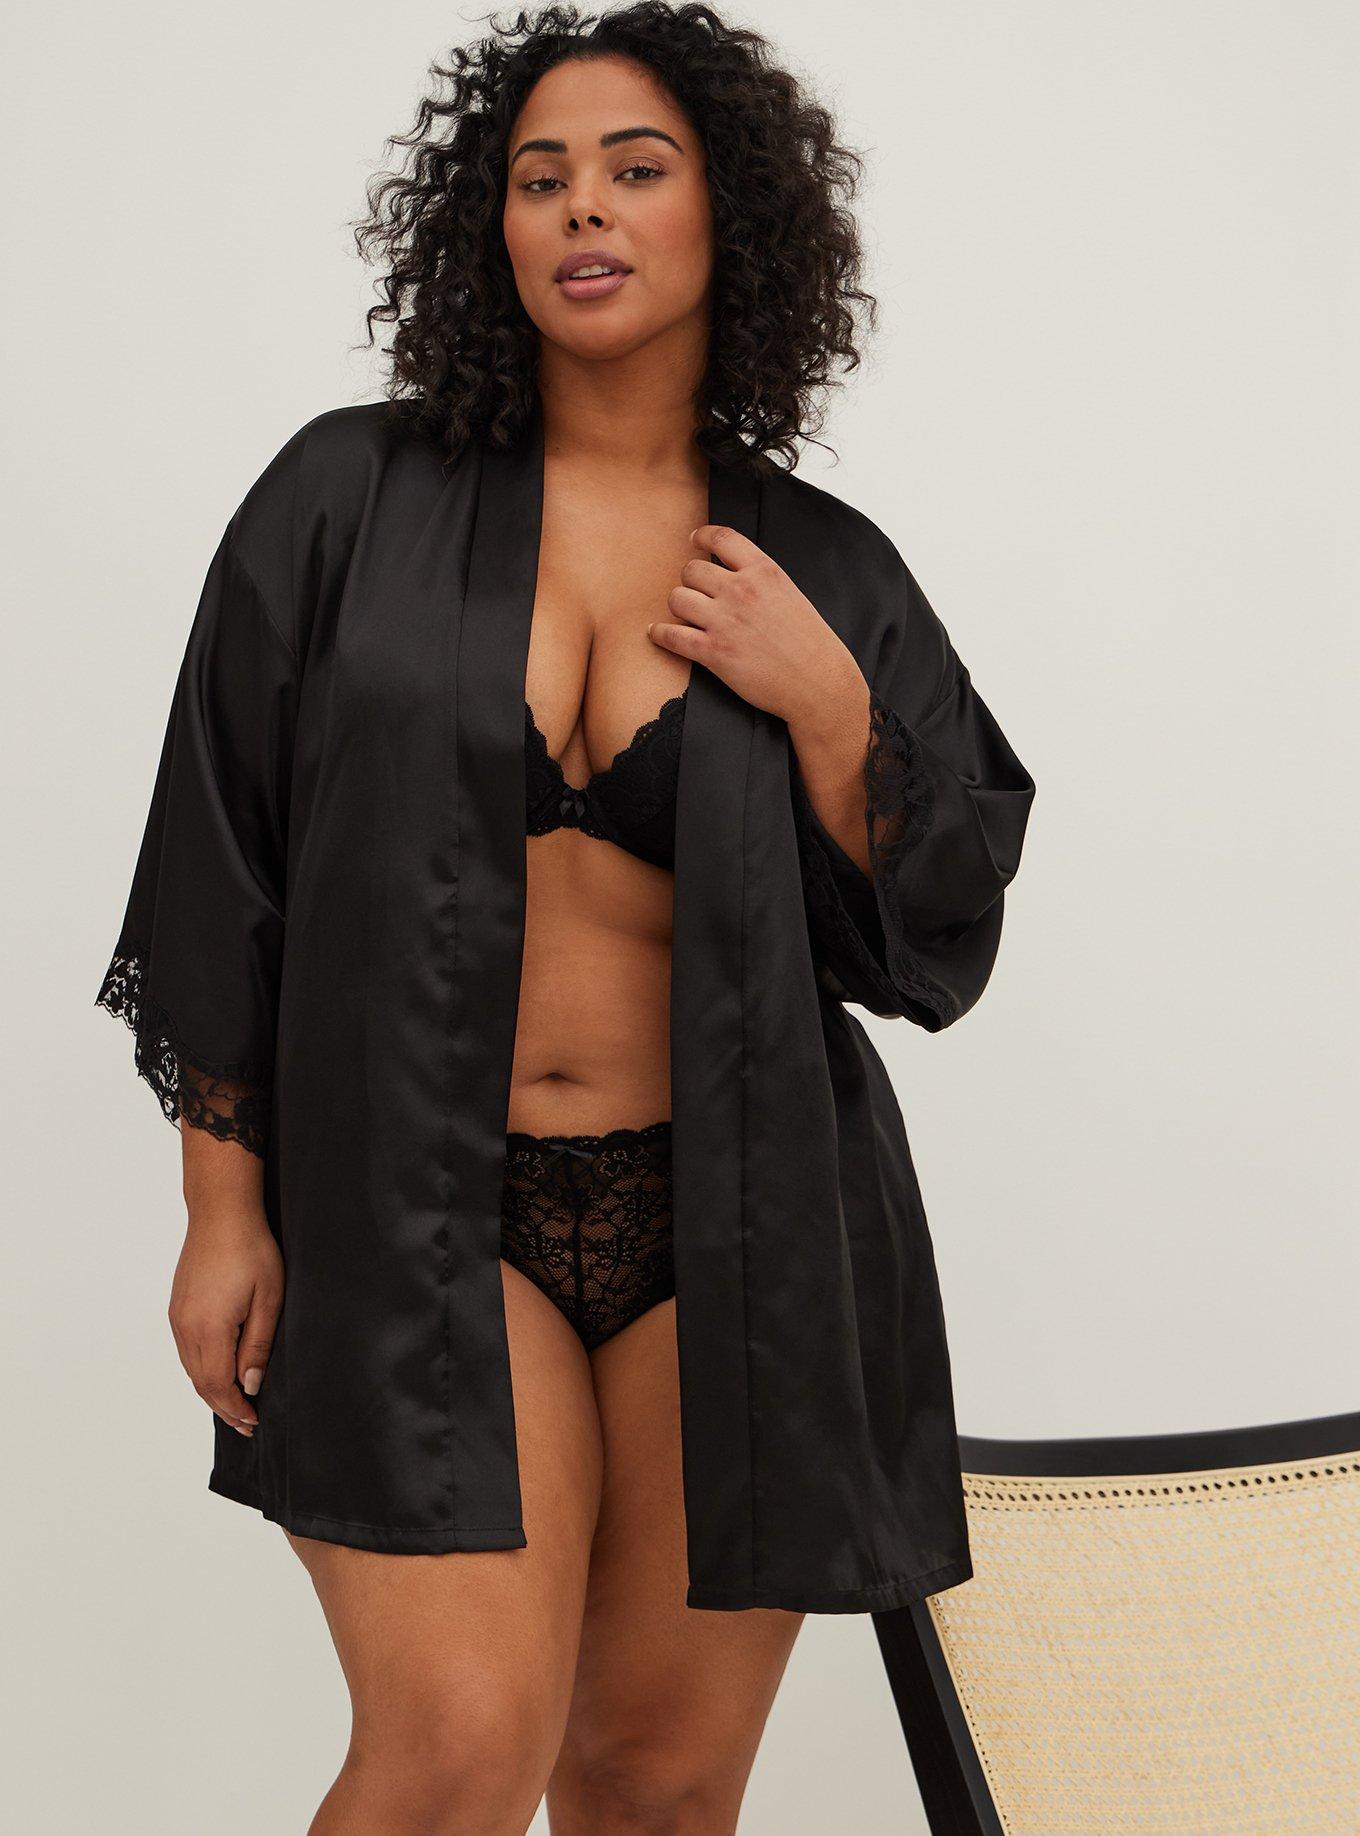 WMNS Short Sleeve Mini Satin Robe - Lace Back and Shoulder / Wide